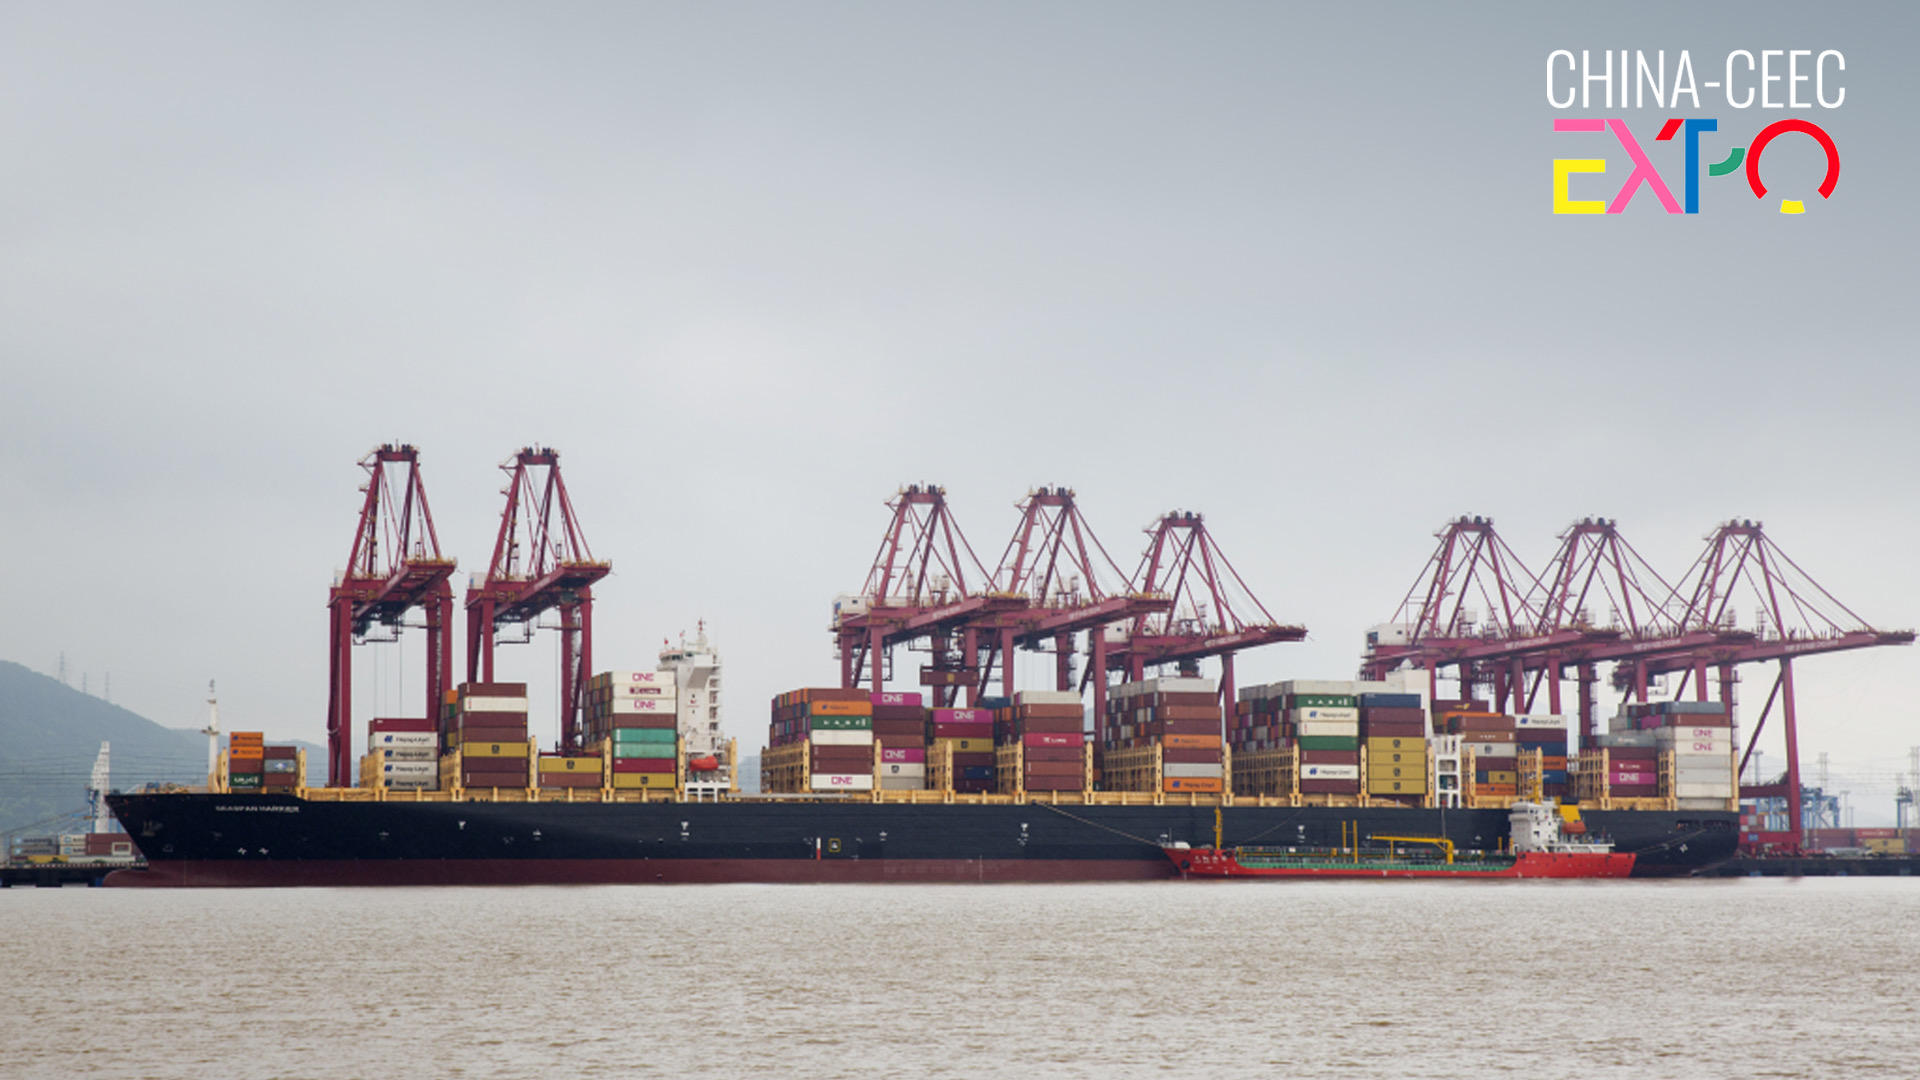 In pictures: China's Ningbo Zhoushan port